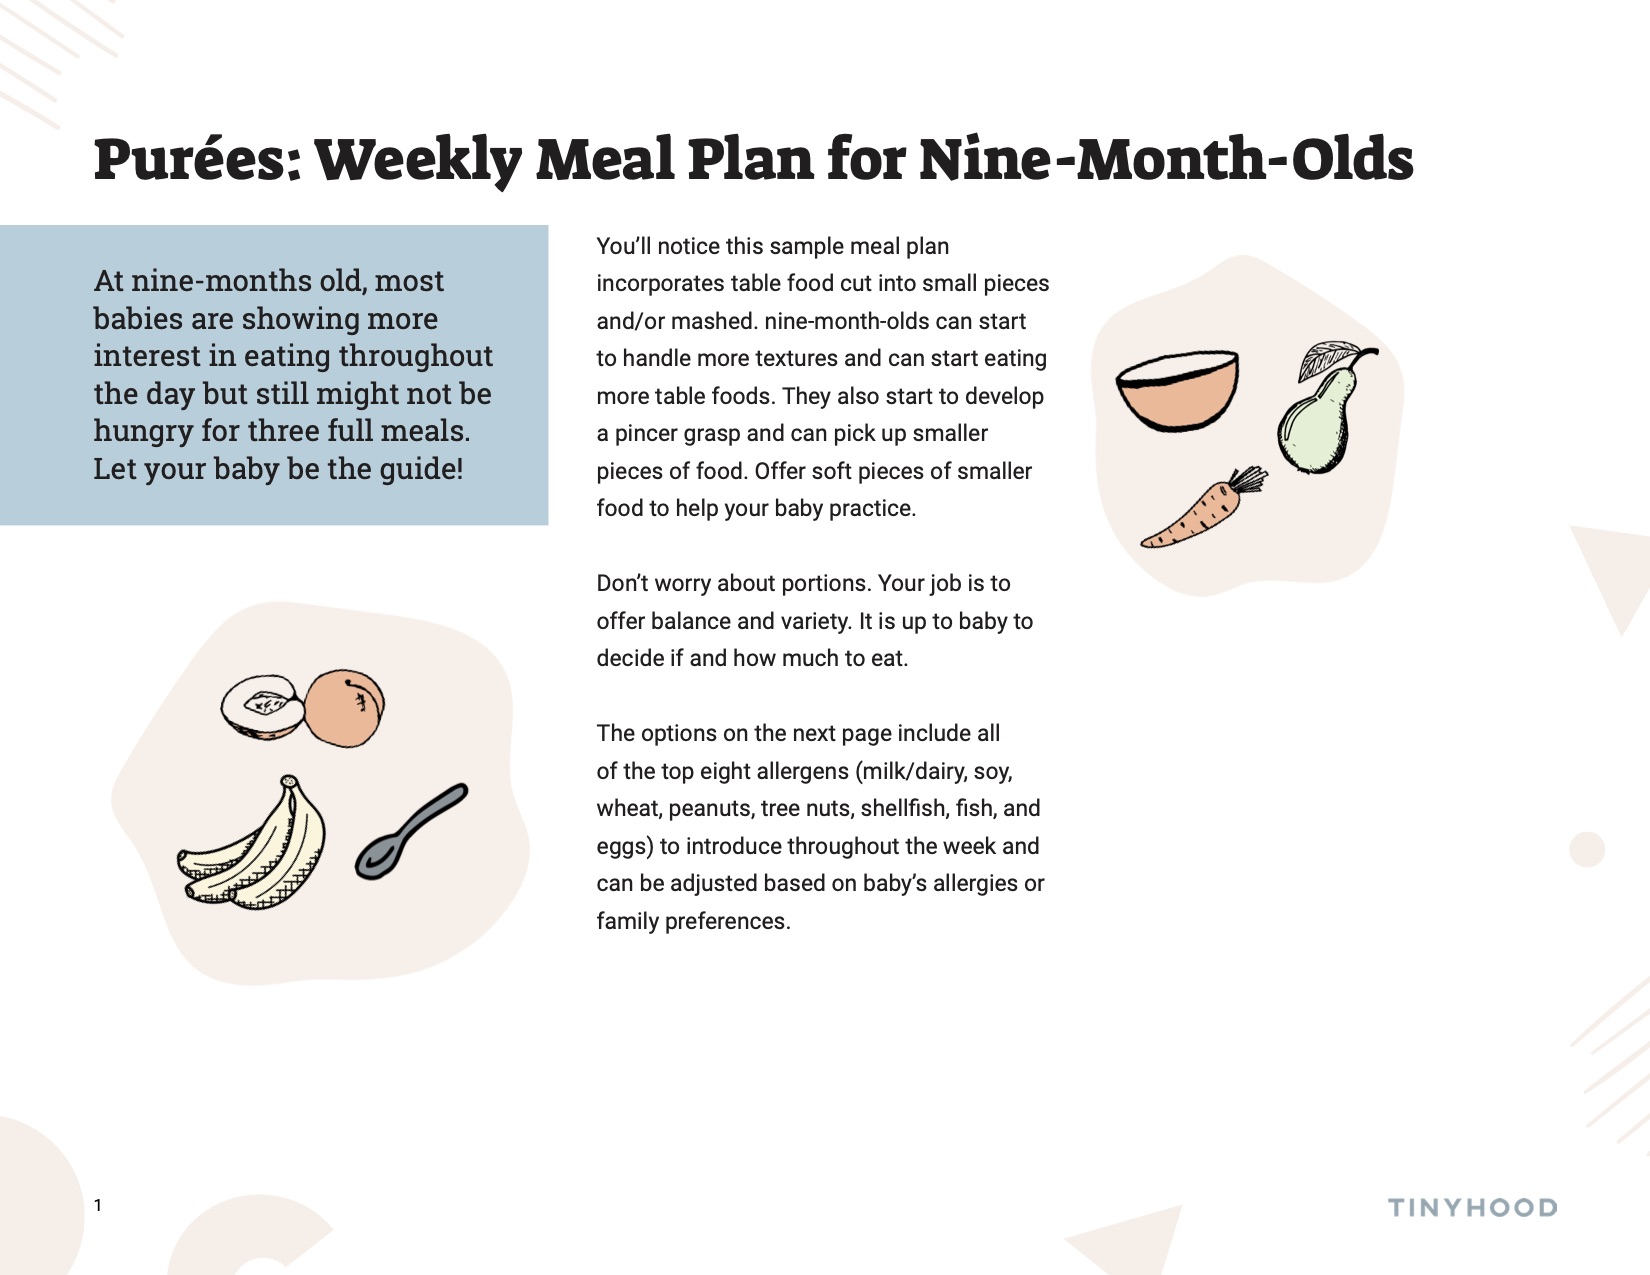 https://tinyhood-assets.s3.amazonaws.com/publicassets/Takeaways/handouts/uploads/weekly-meal-plan-for-9-month-olds.jpg